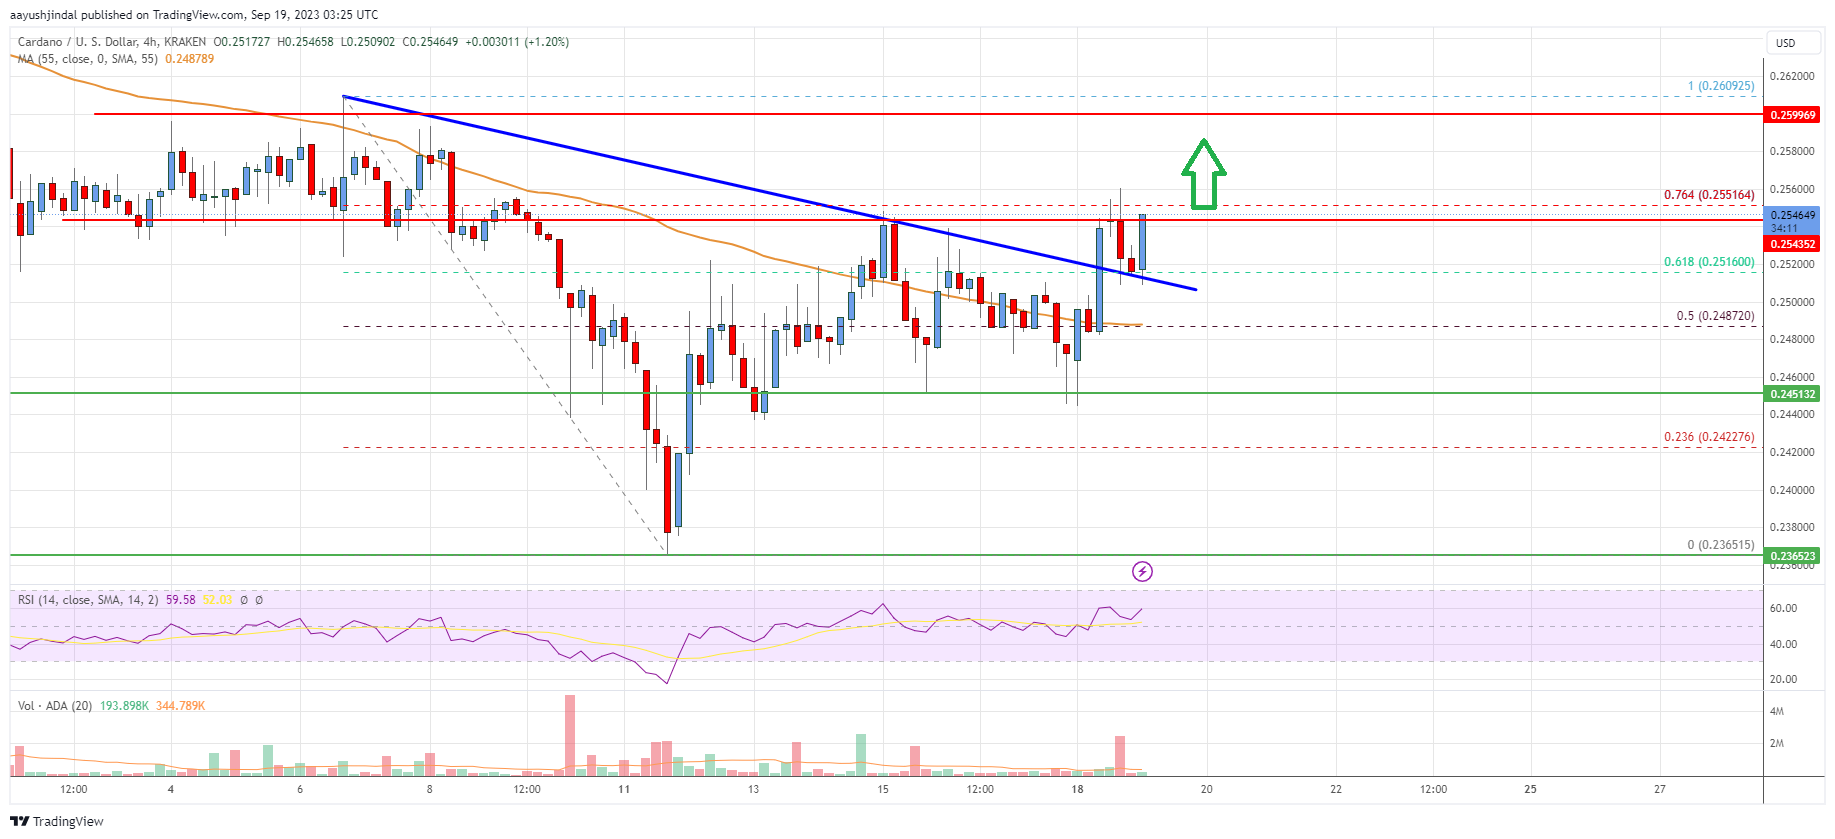 Cardano (ADA) Price Analysis: Recovery Could Gain Pace Above $0.26